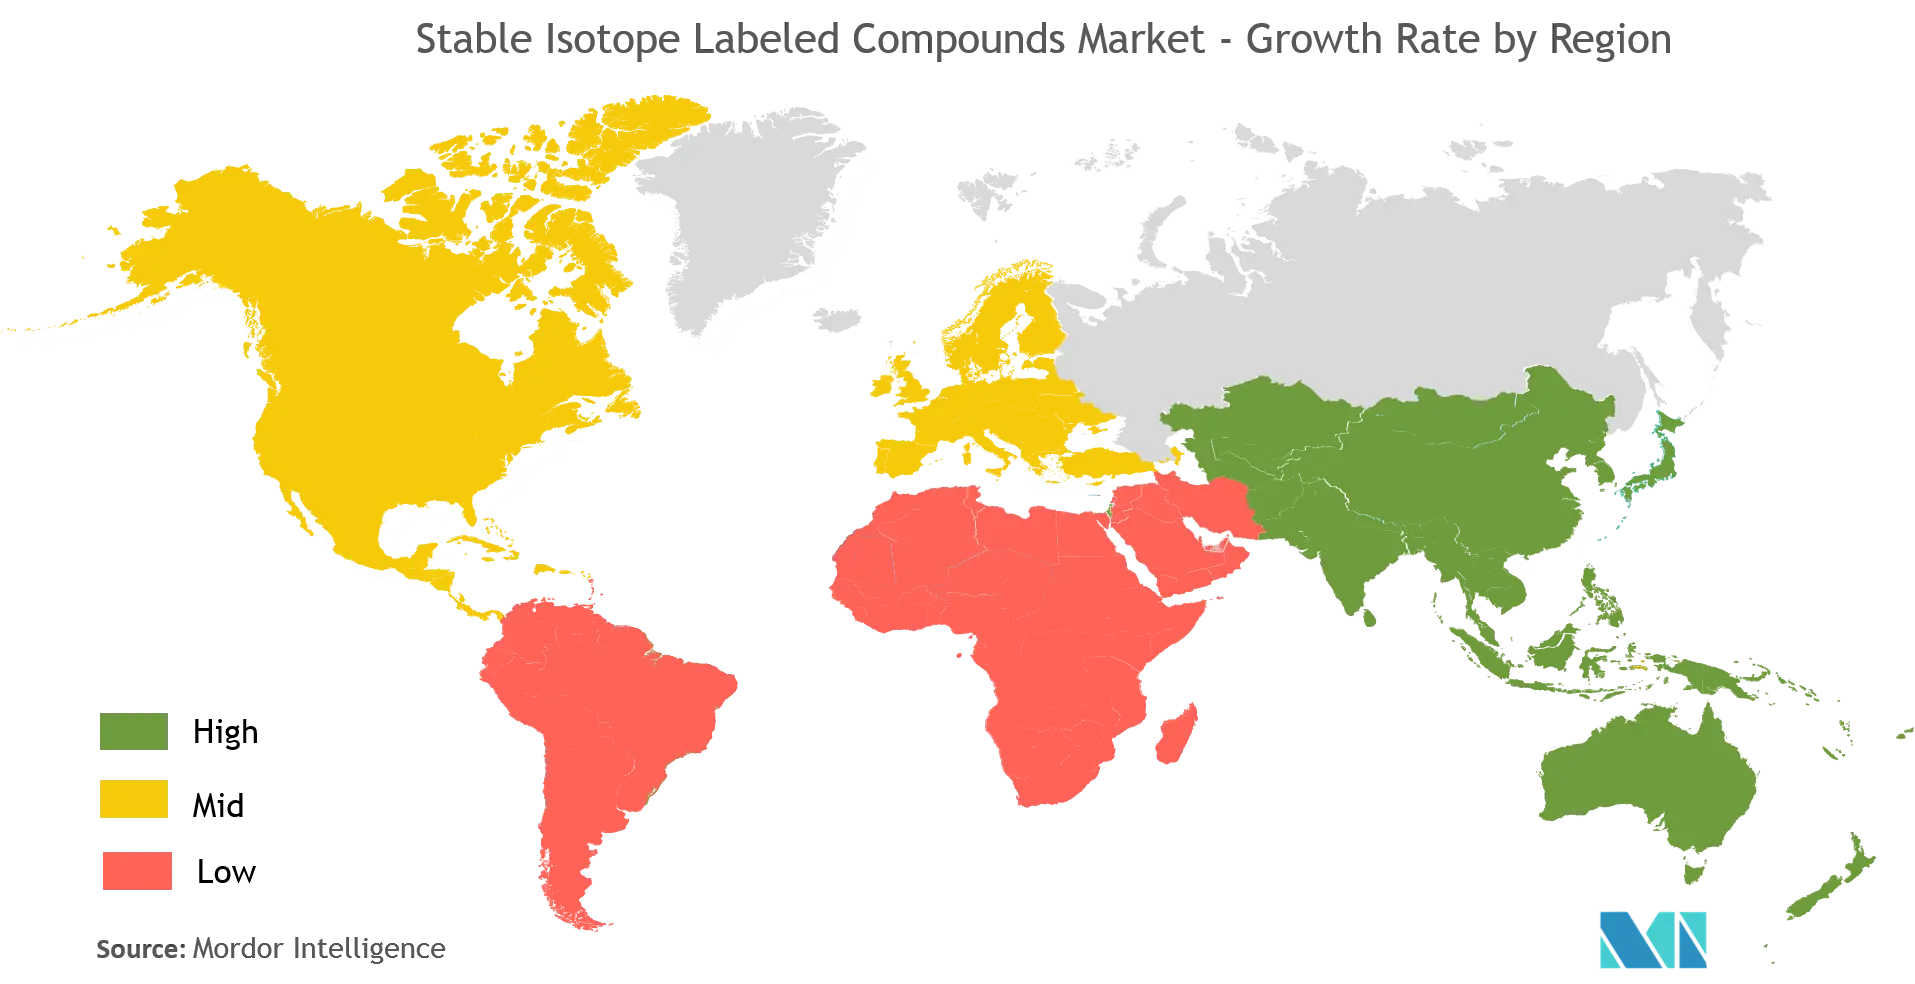 Stable Isotope Labeled Compounds Market Growth